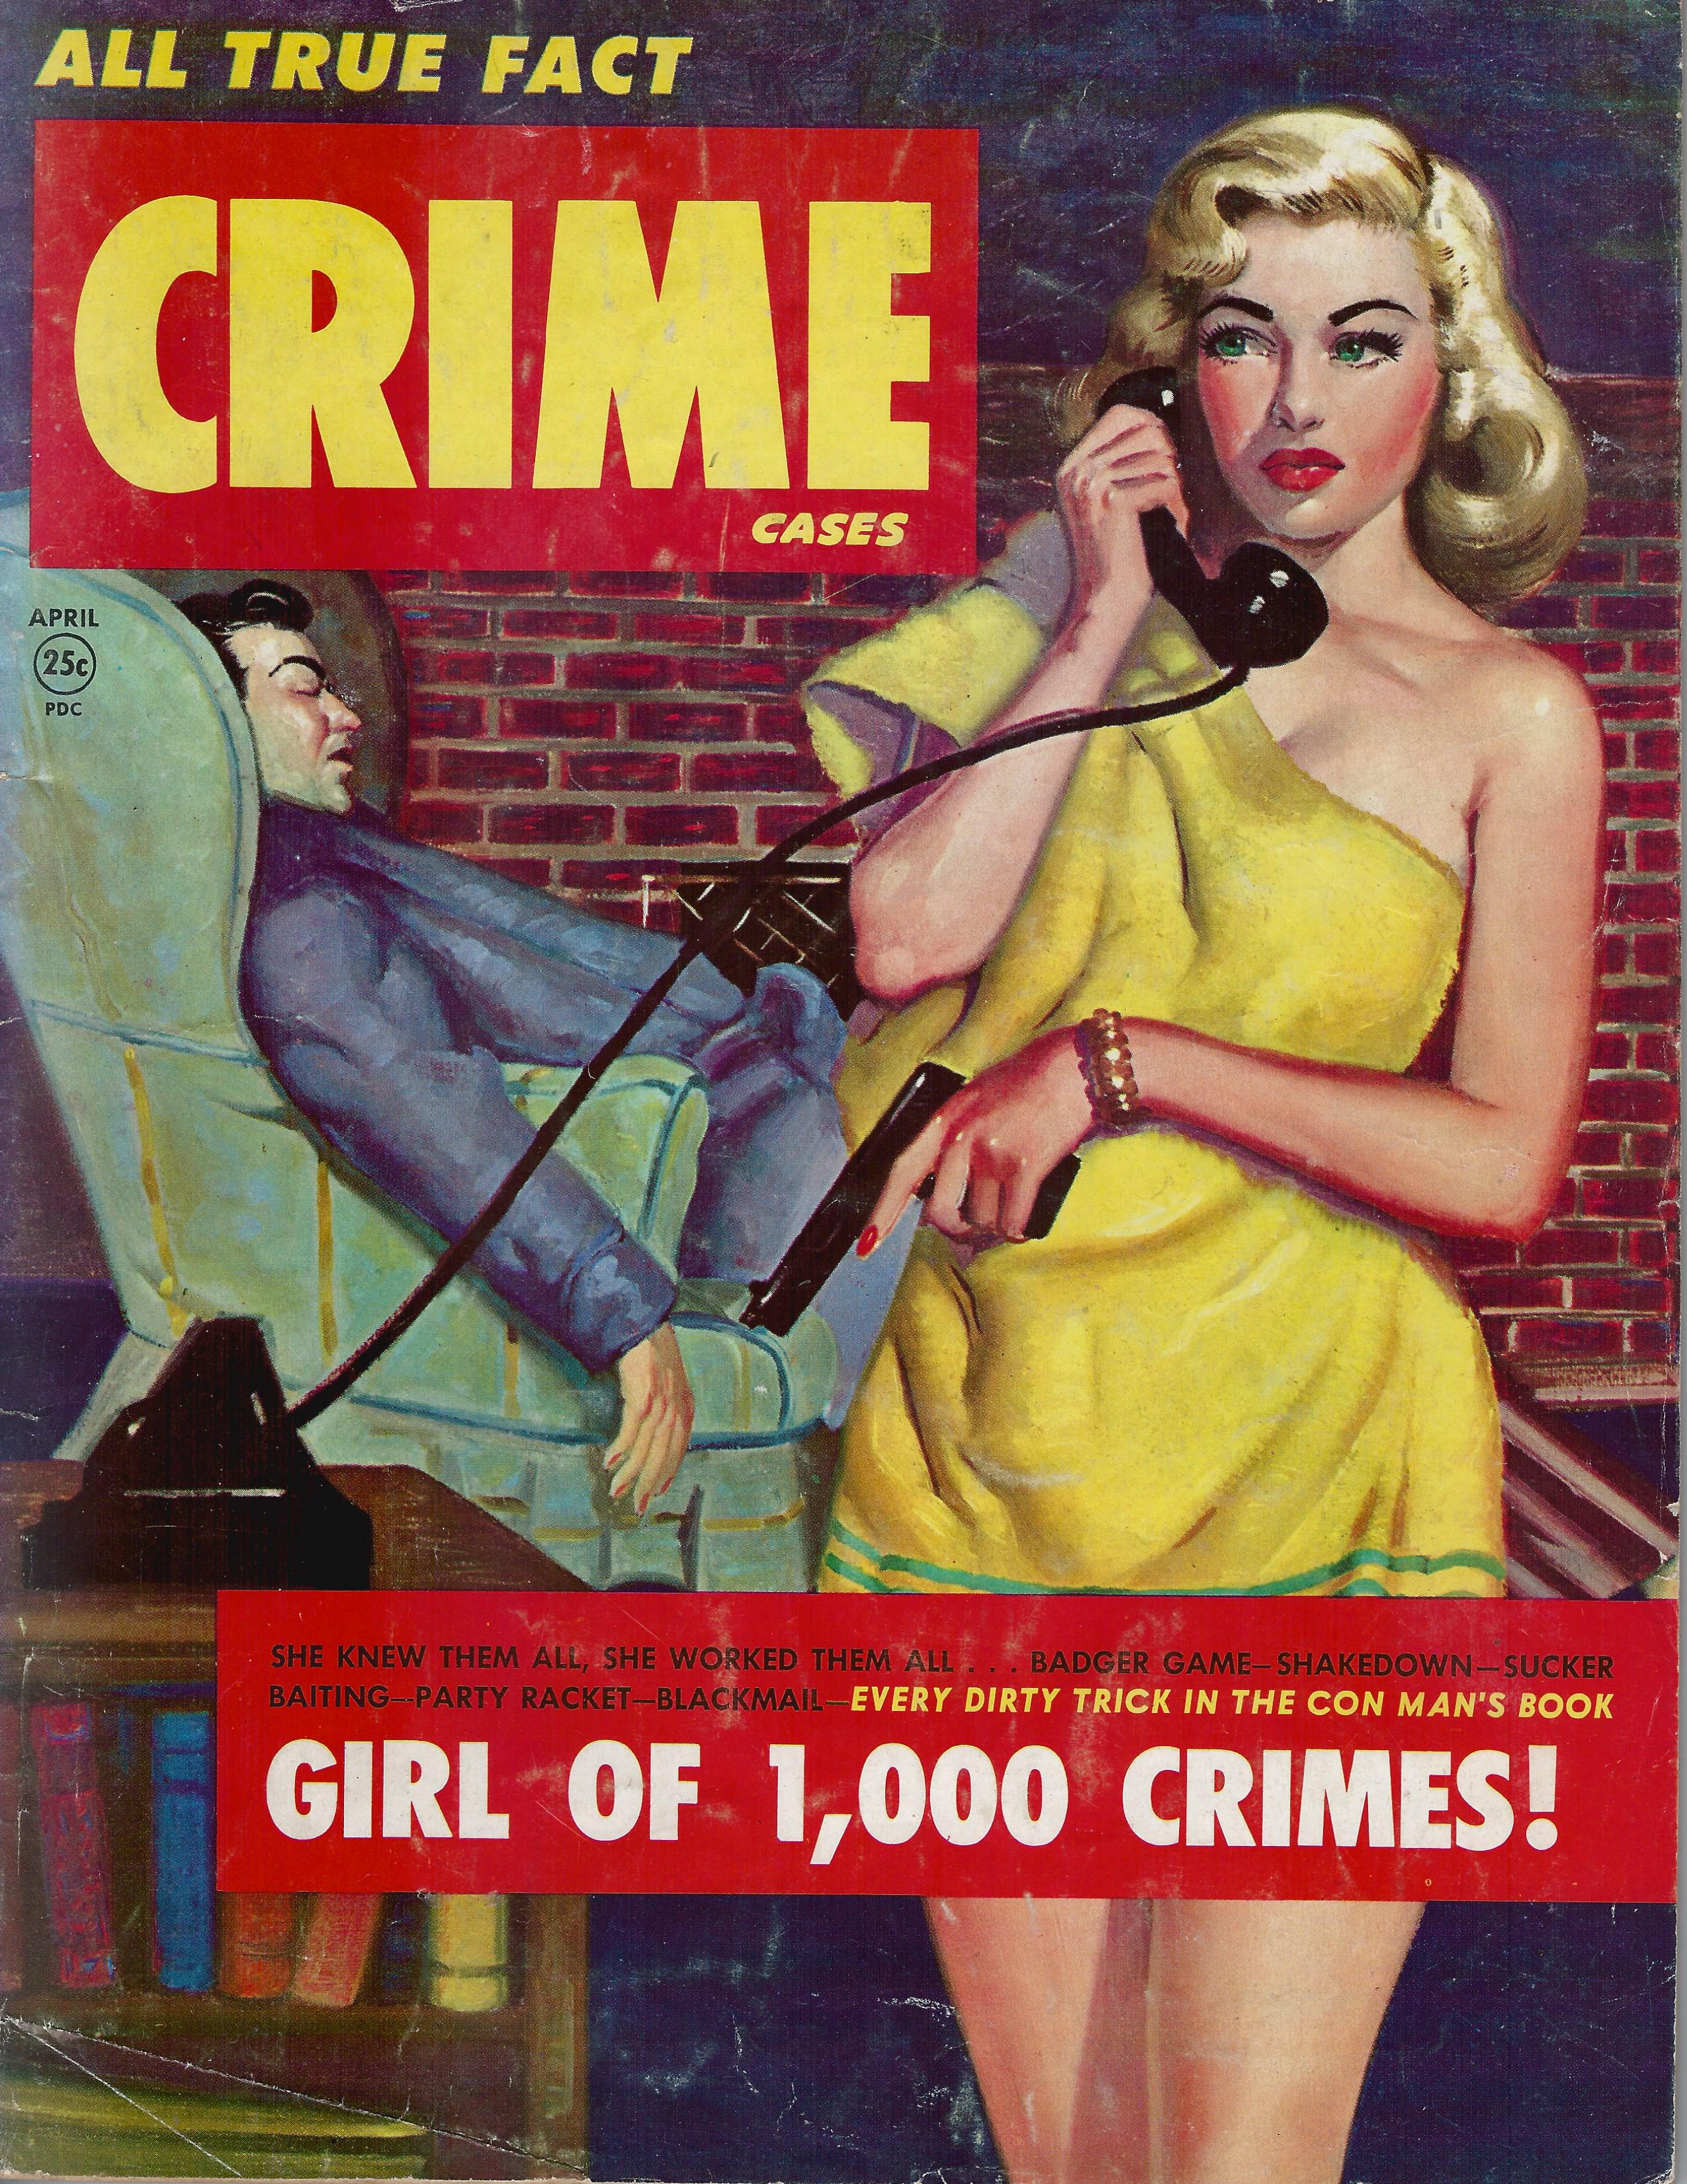 1940s USA Private Detective Stories Magazine Cover AppleMark.